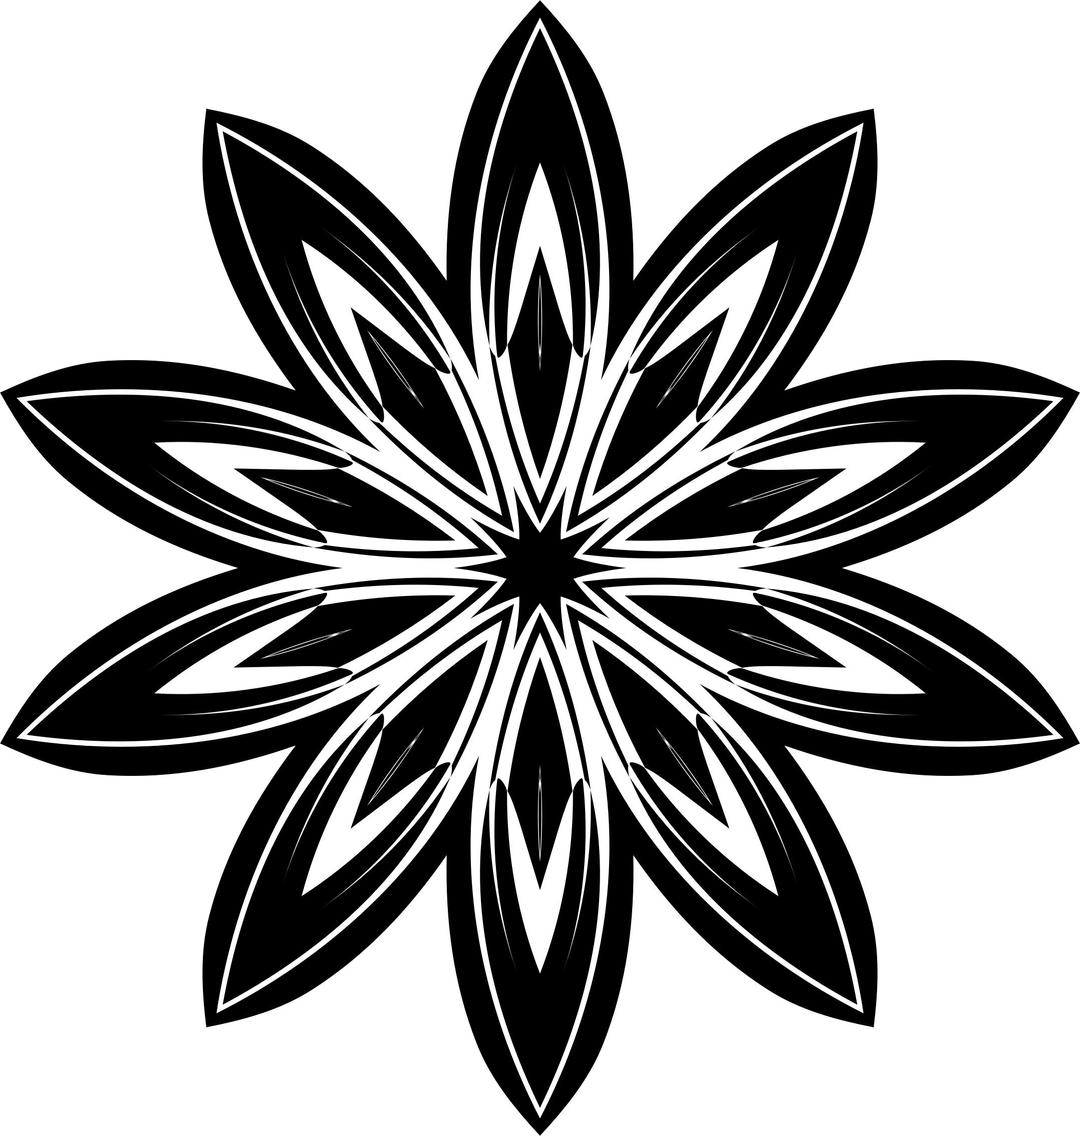 Arbitrary Flower Silhouette png transparent